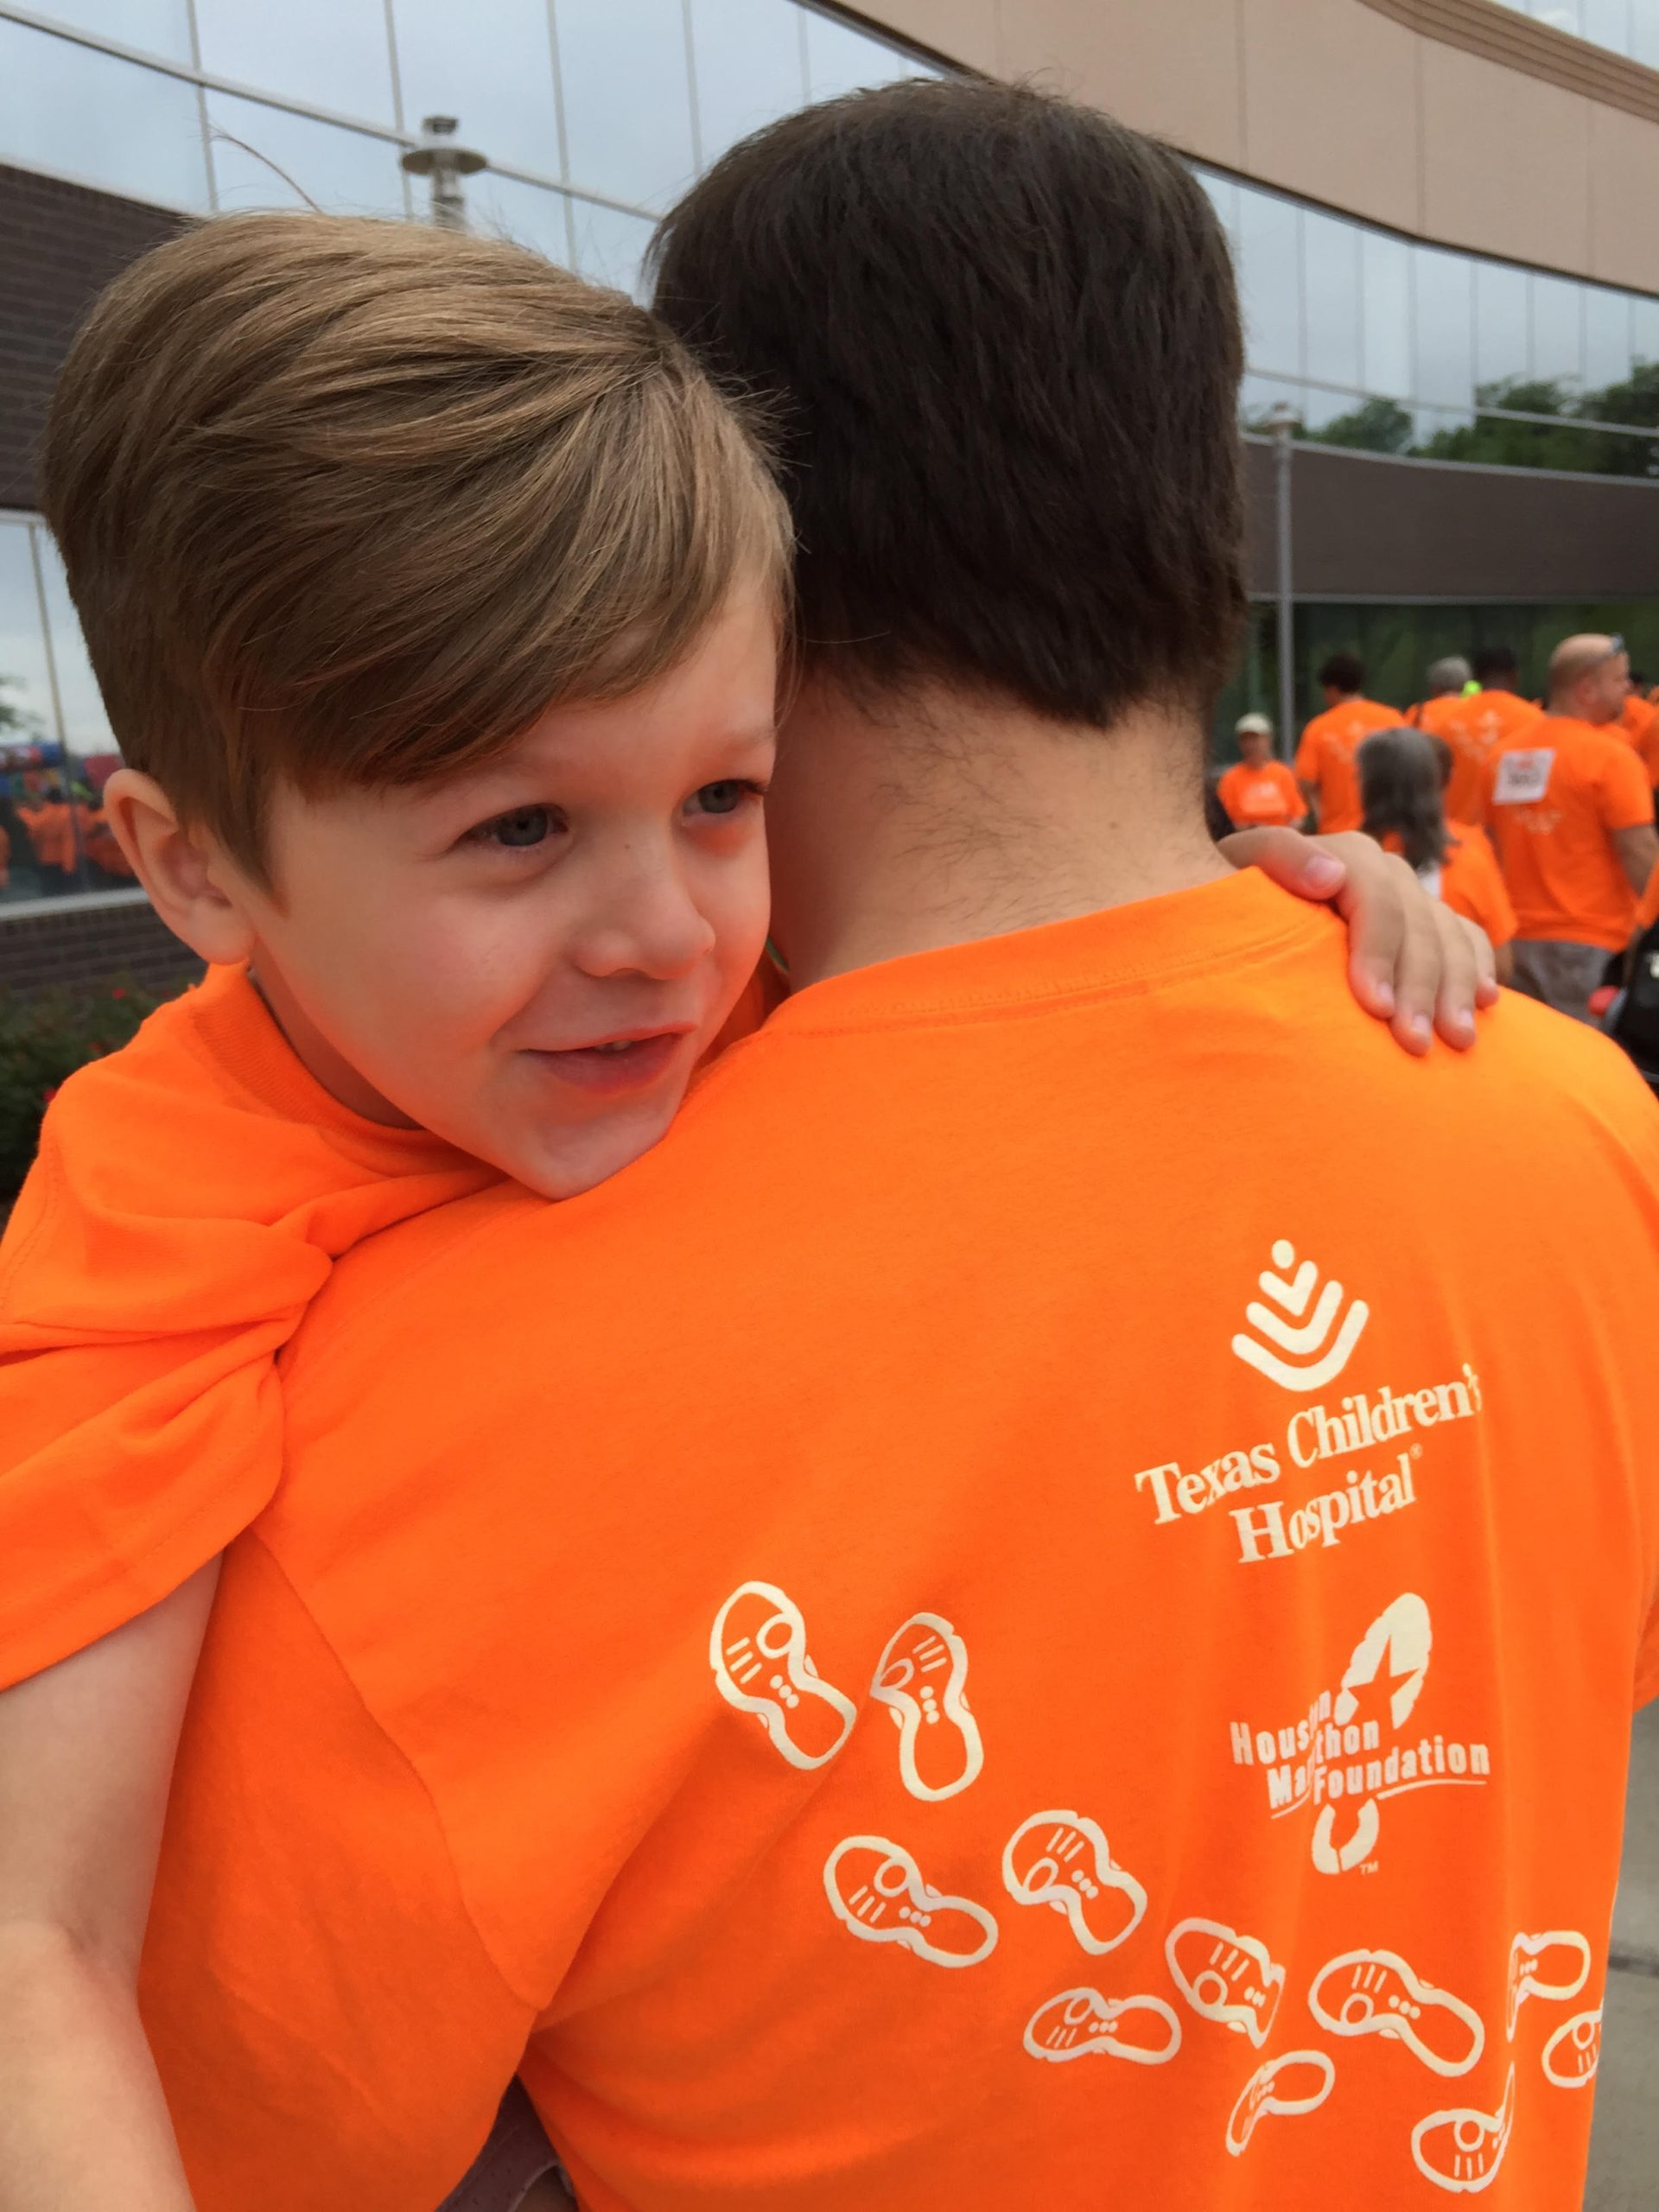 father and young son embrace, wearing matching orange t shirts